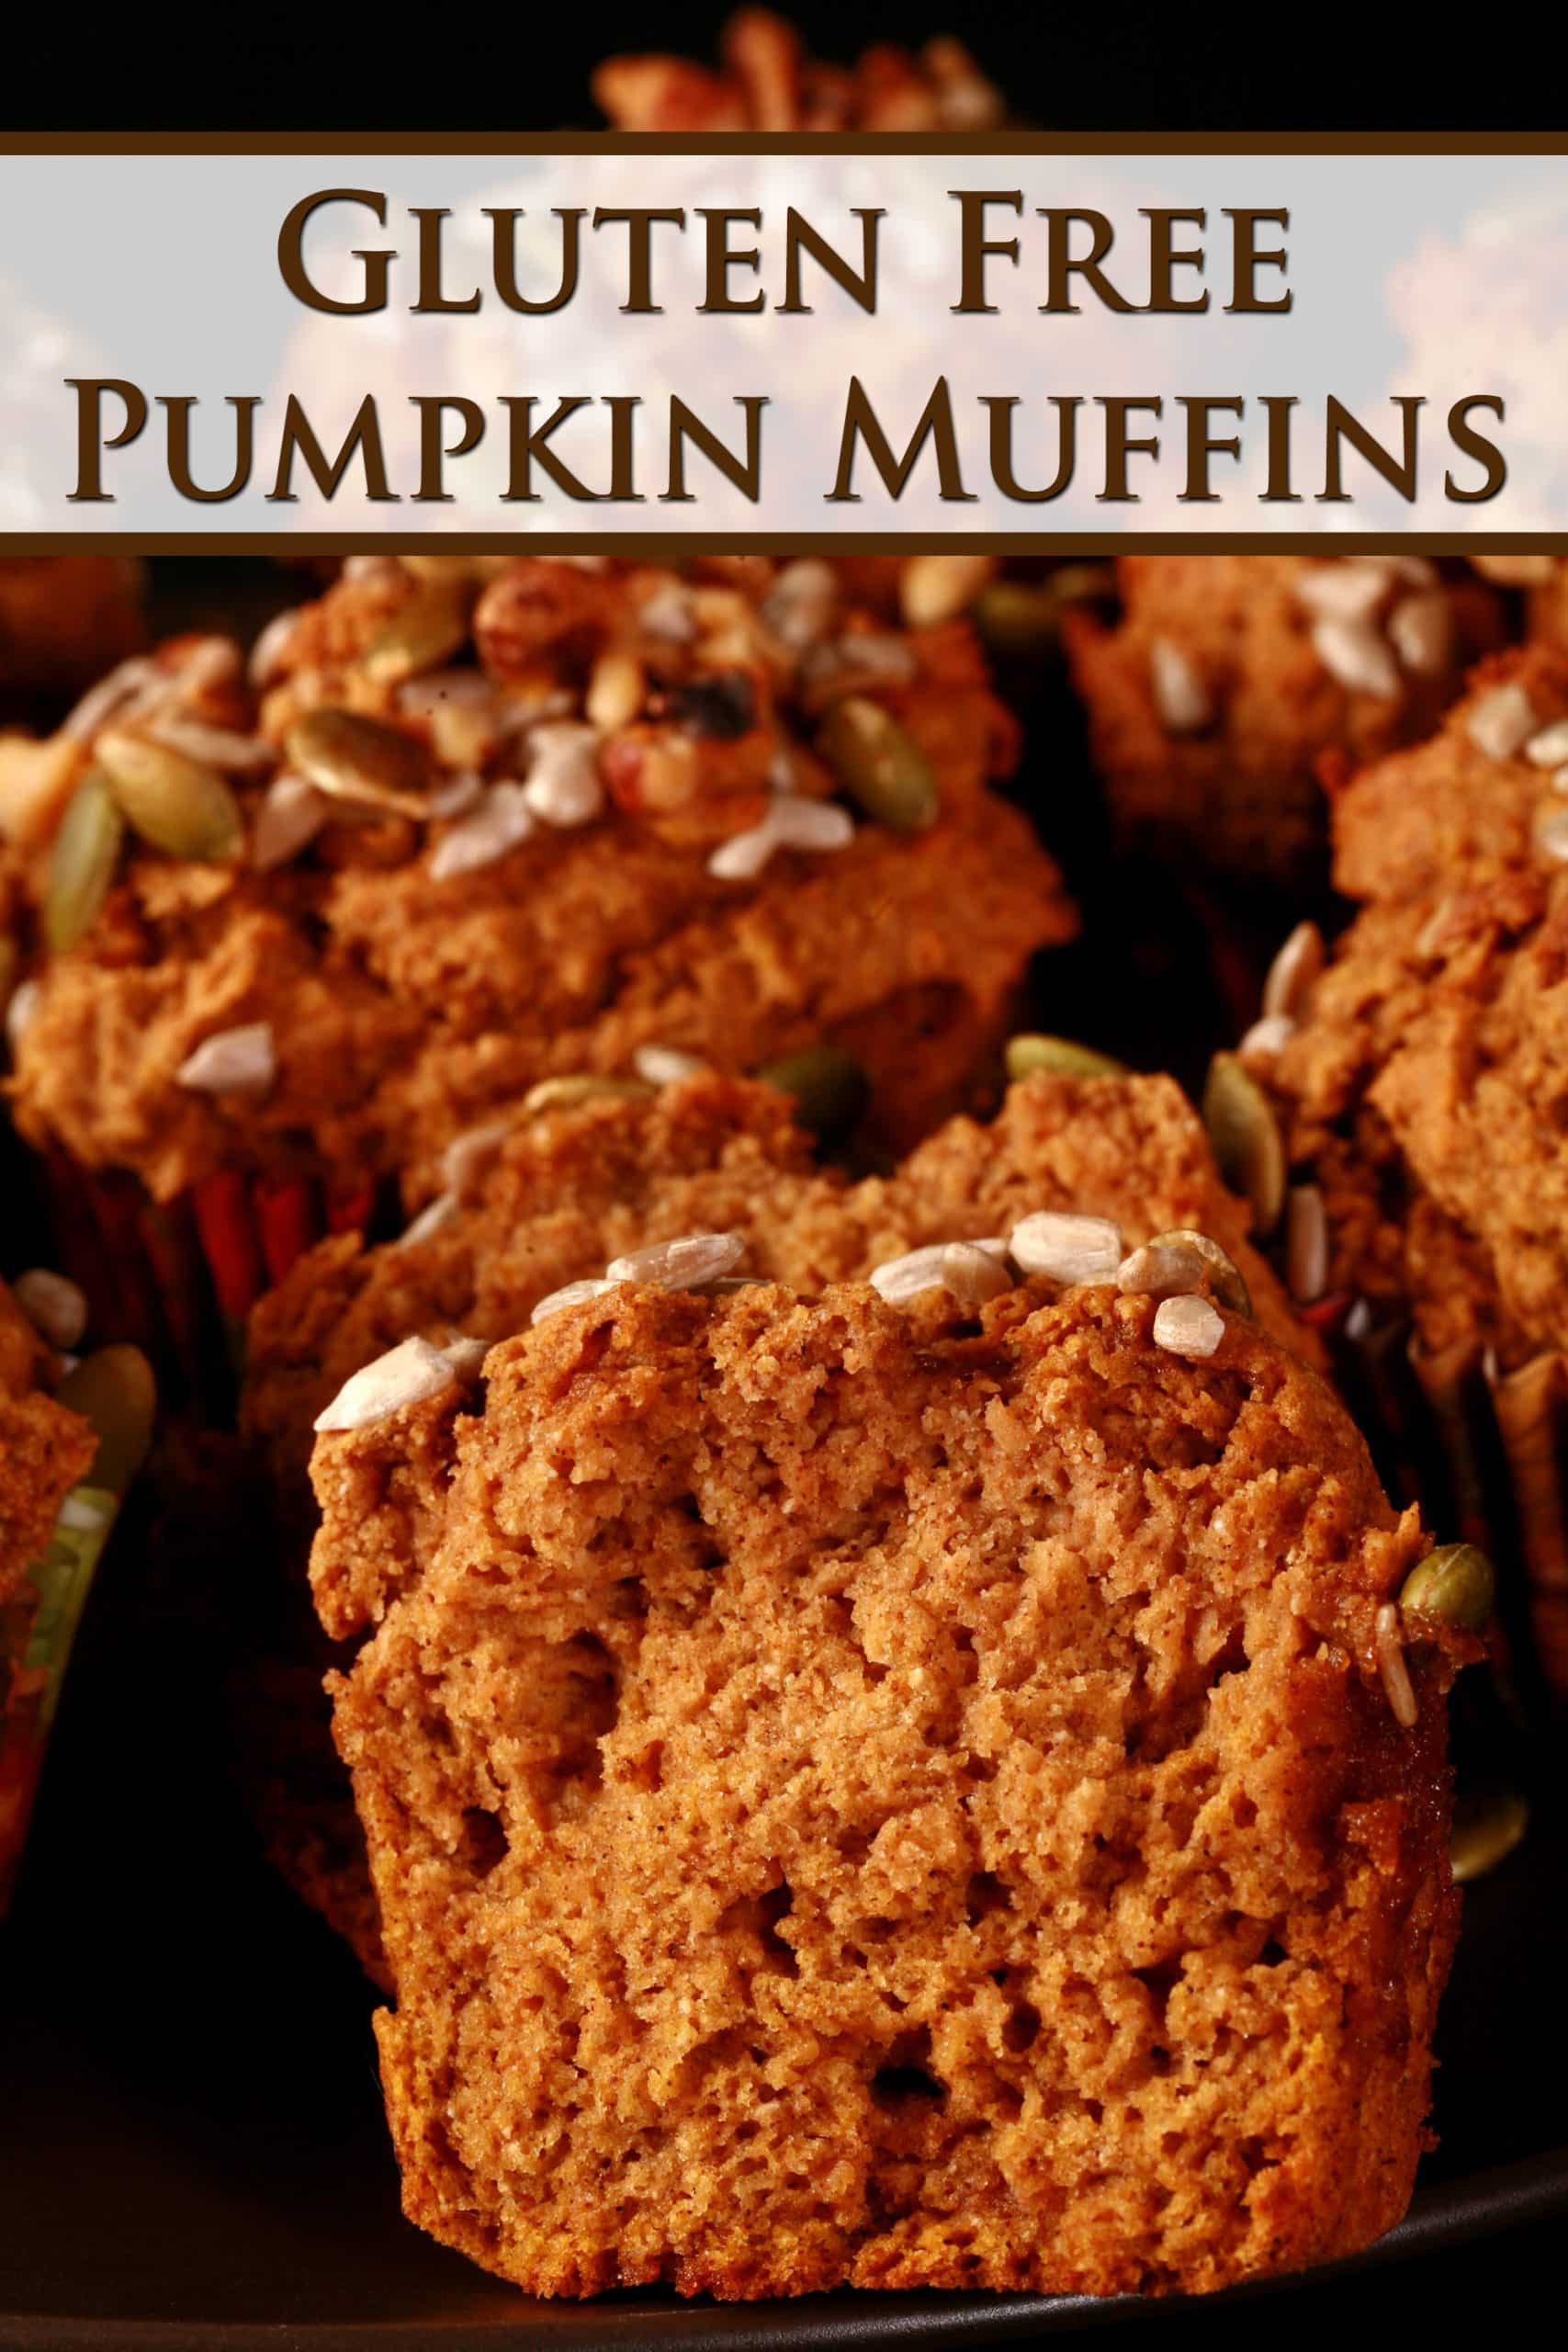 A plate of gluten-free pumpkin muffins, all topped with a mix of seeds and nuts.  Overlaid text says gluten free pumpkin muffins.